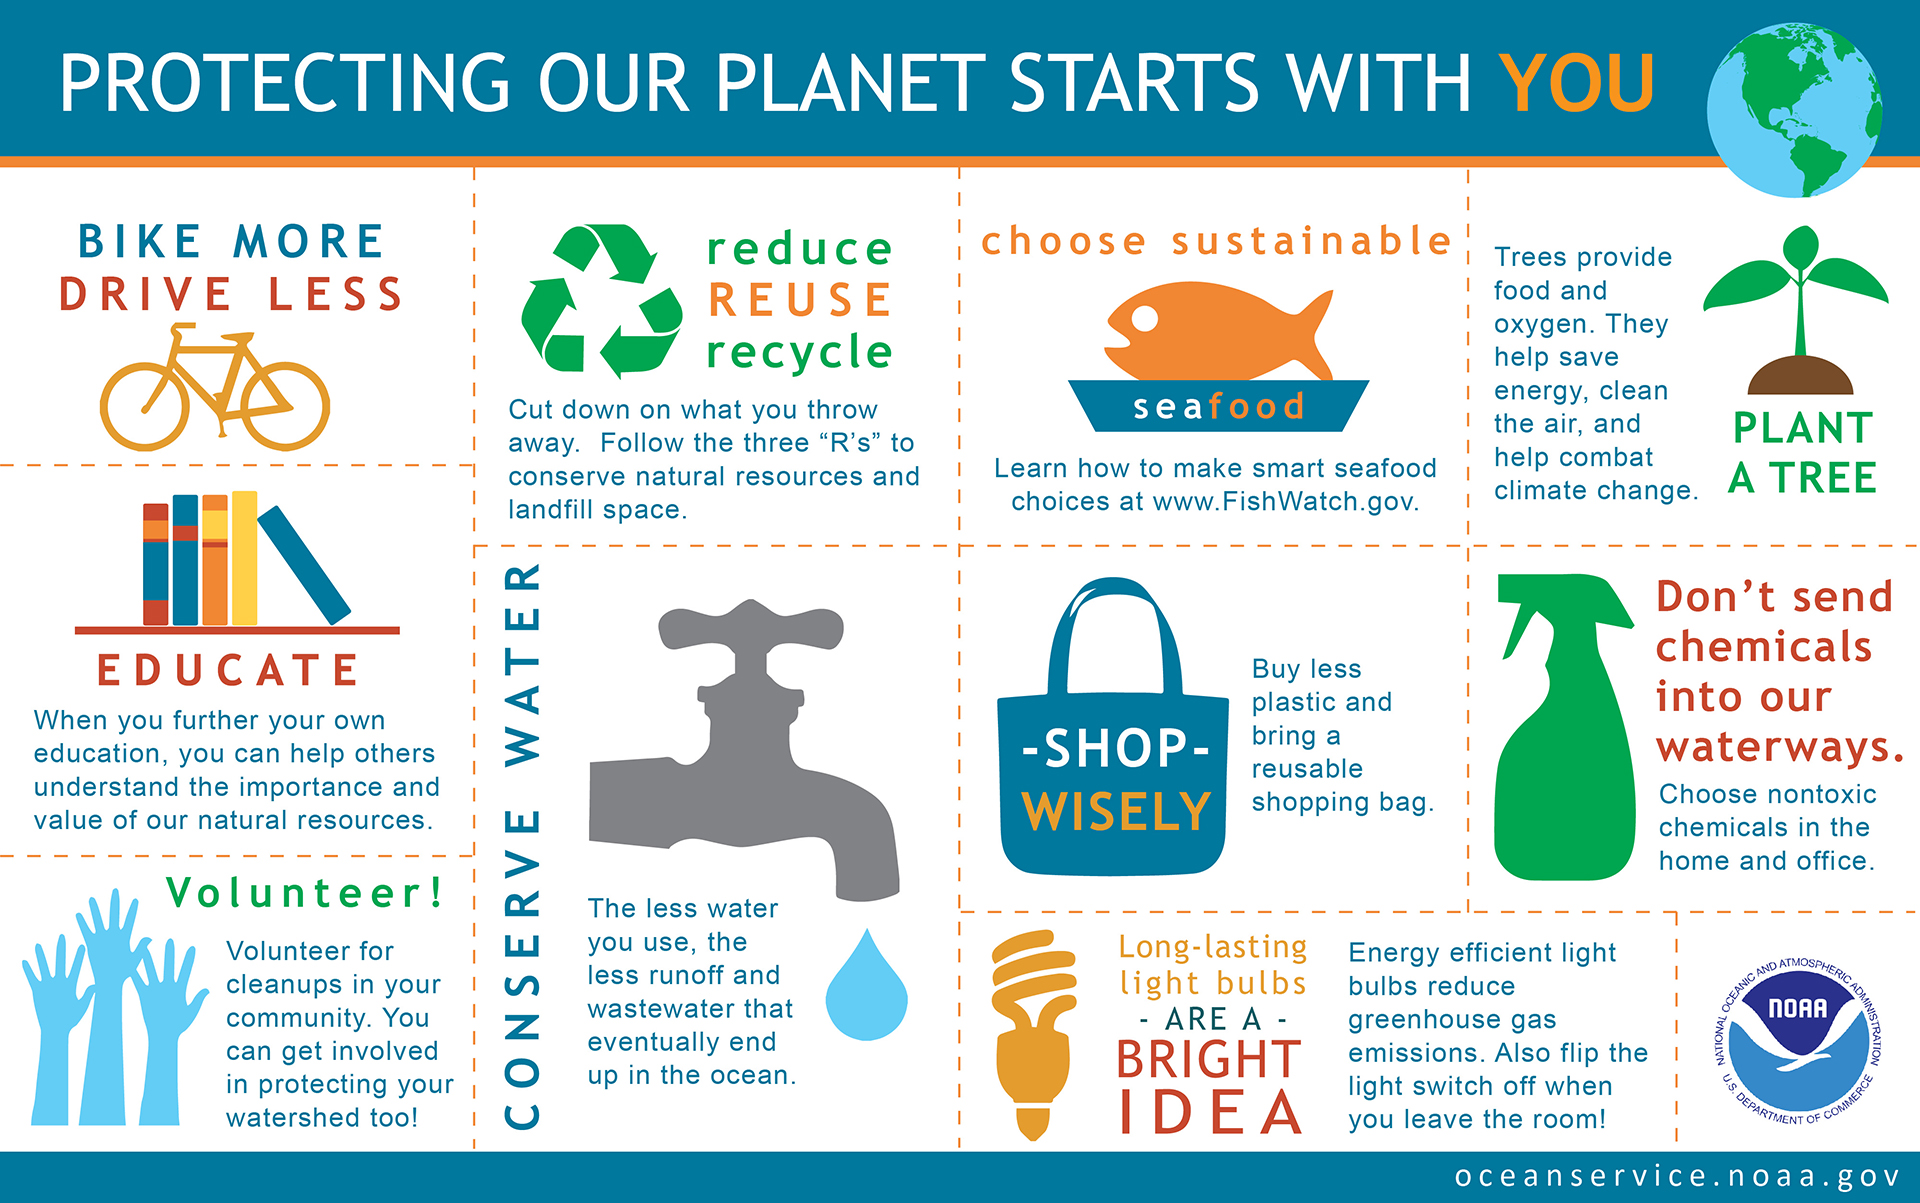 Why is it important to sustain keep our environment healthy?